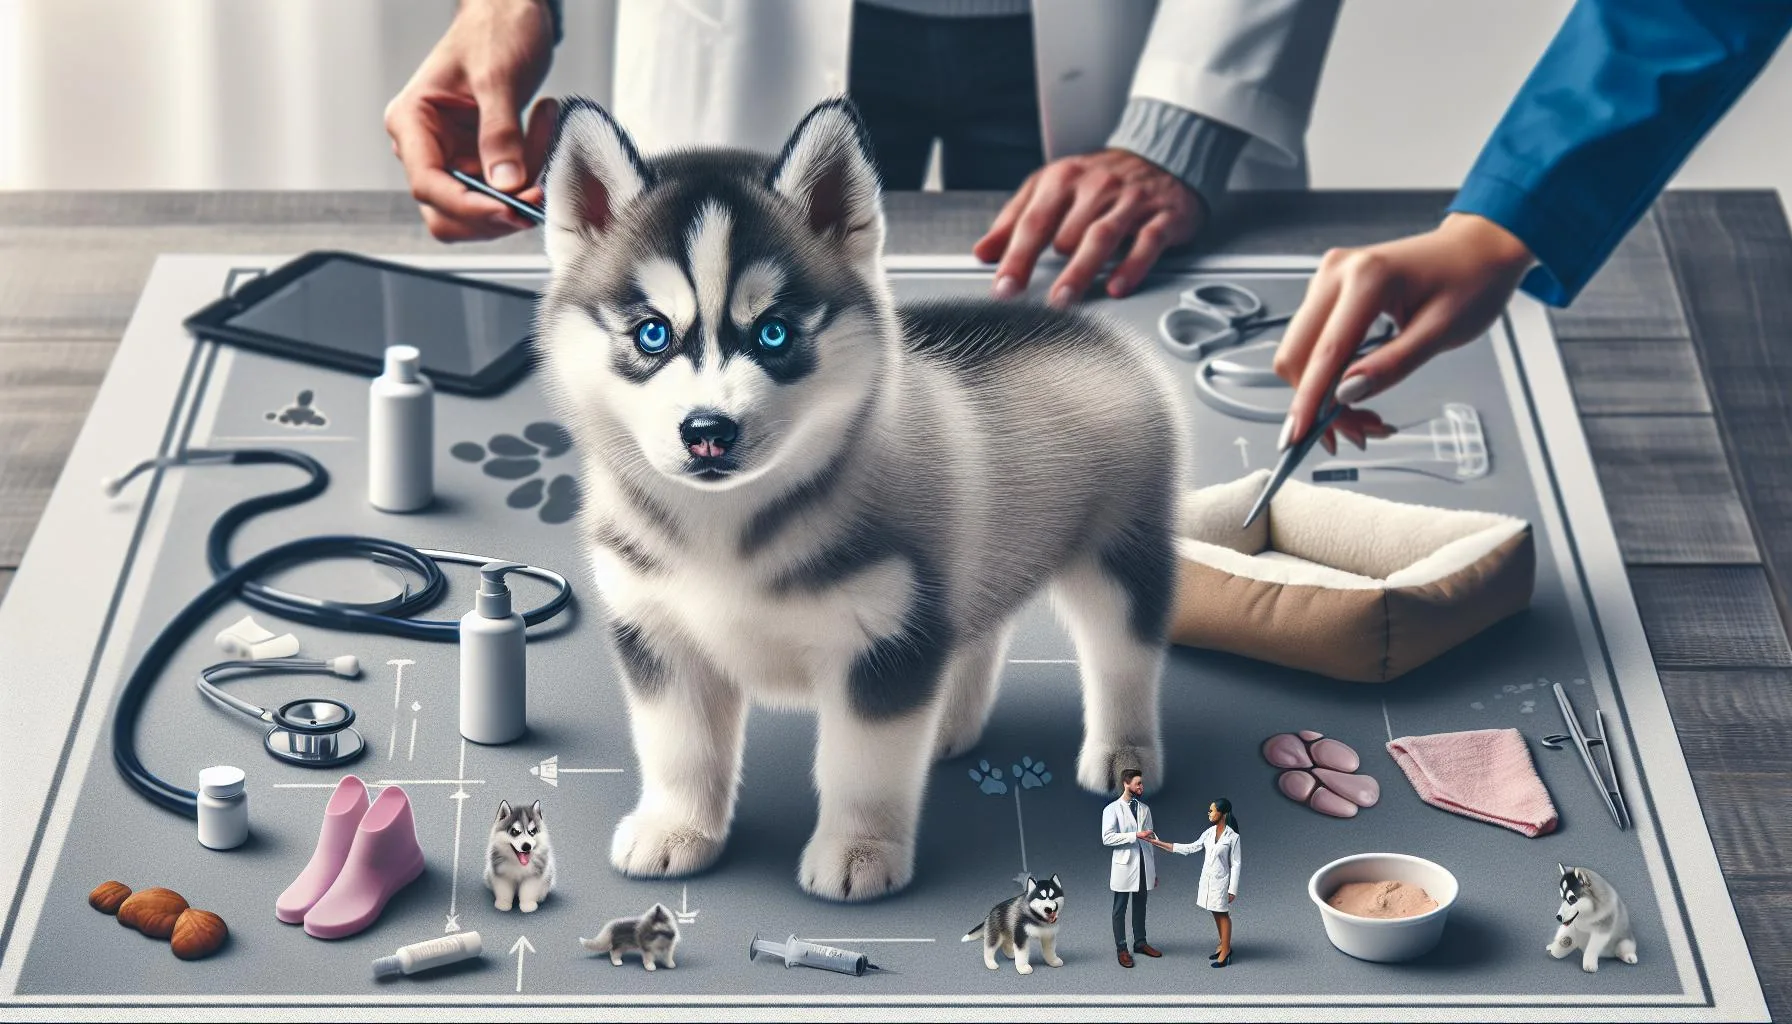 What to Expect: Full-Grown Miniature Husky Care Guide!